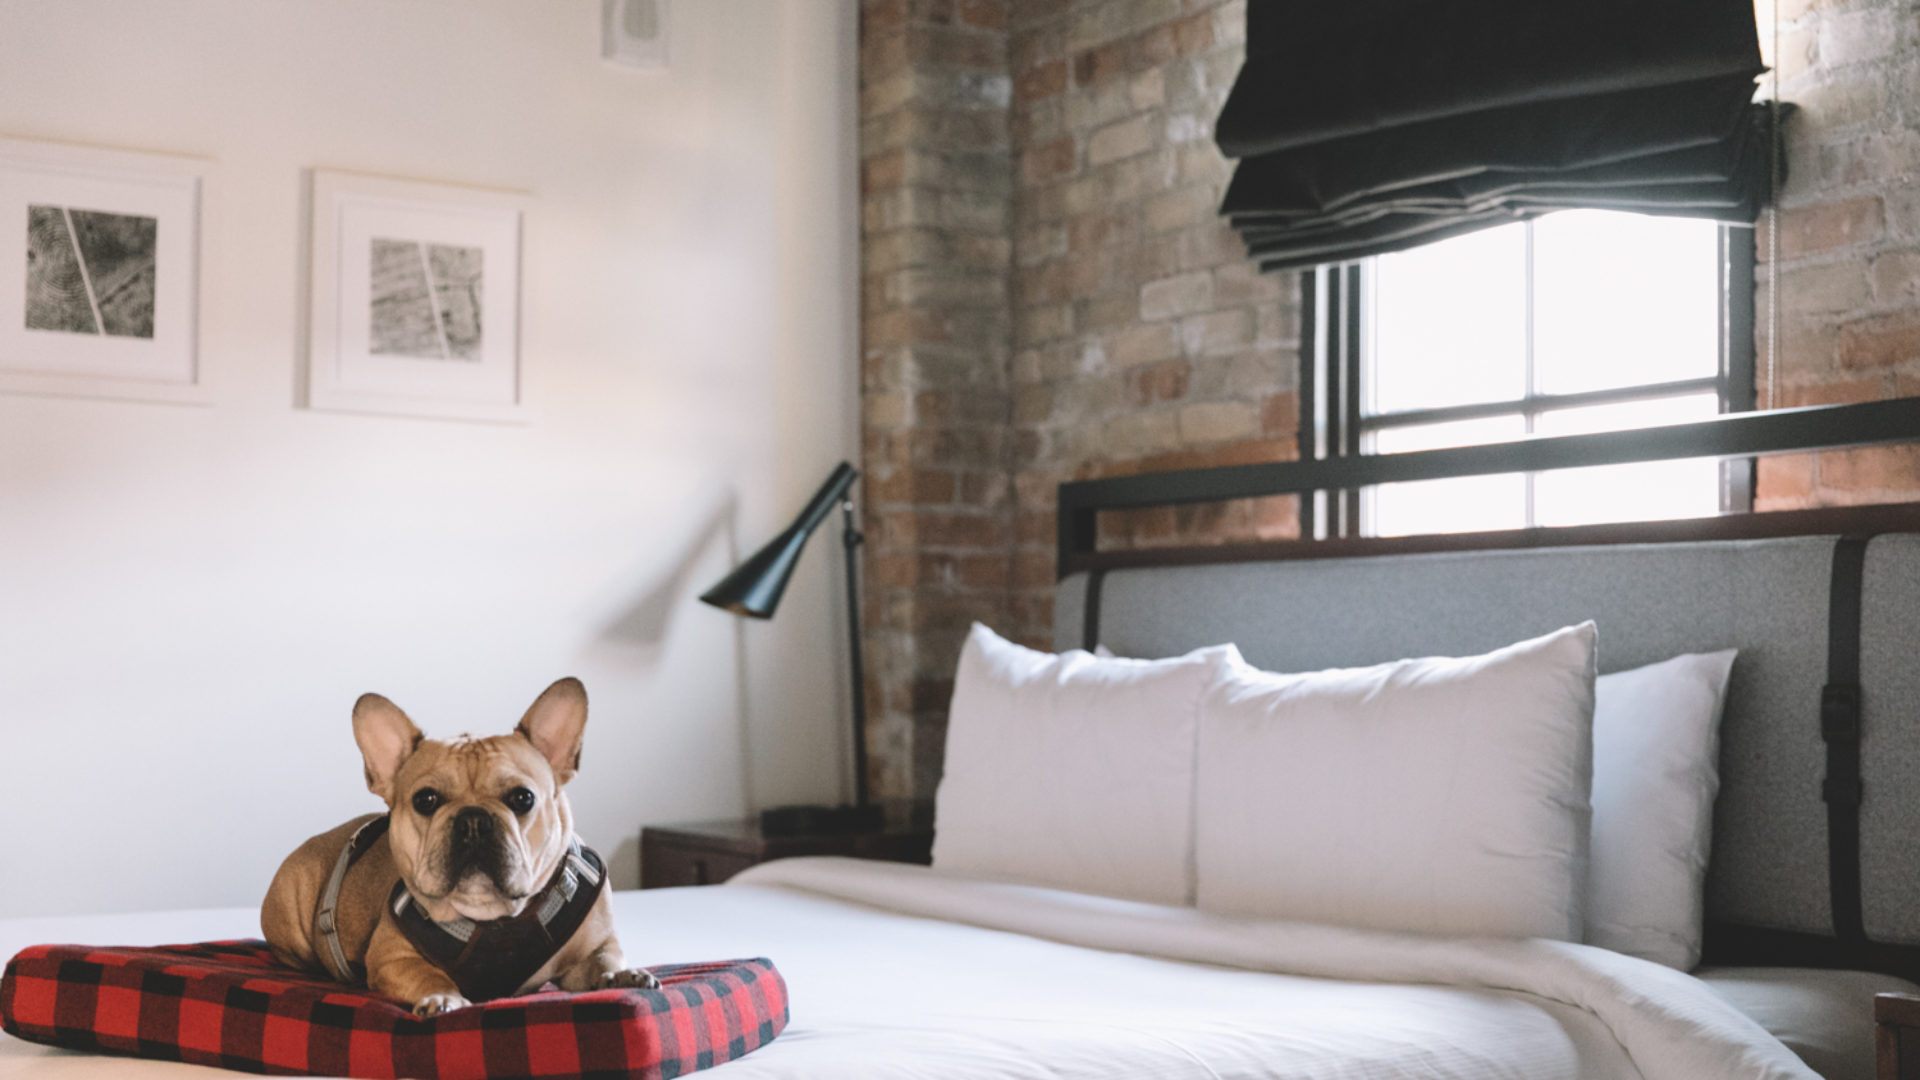 Small brown dog on a plaid dog bed on top of a Minneapolis hotel bed